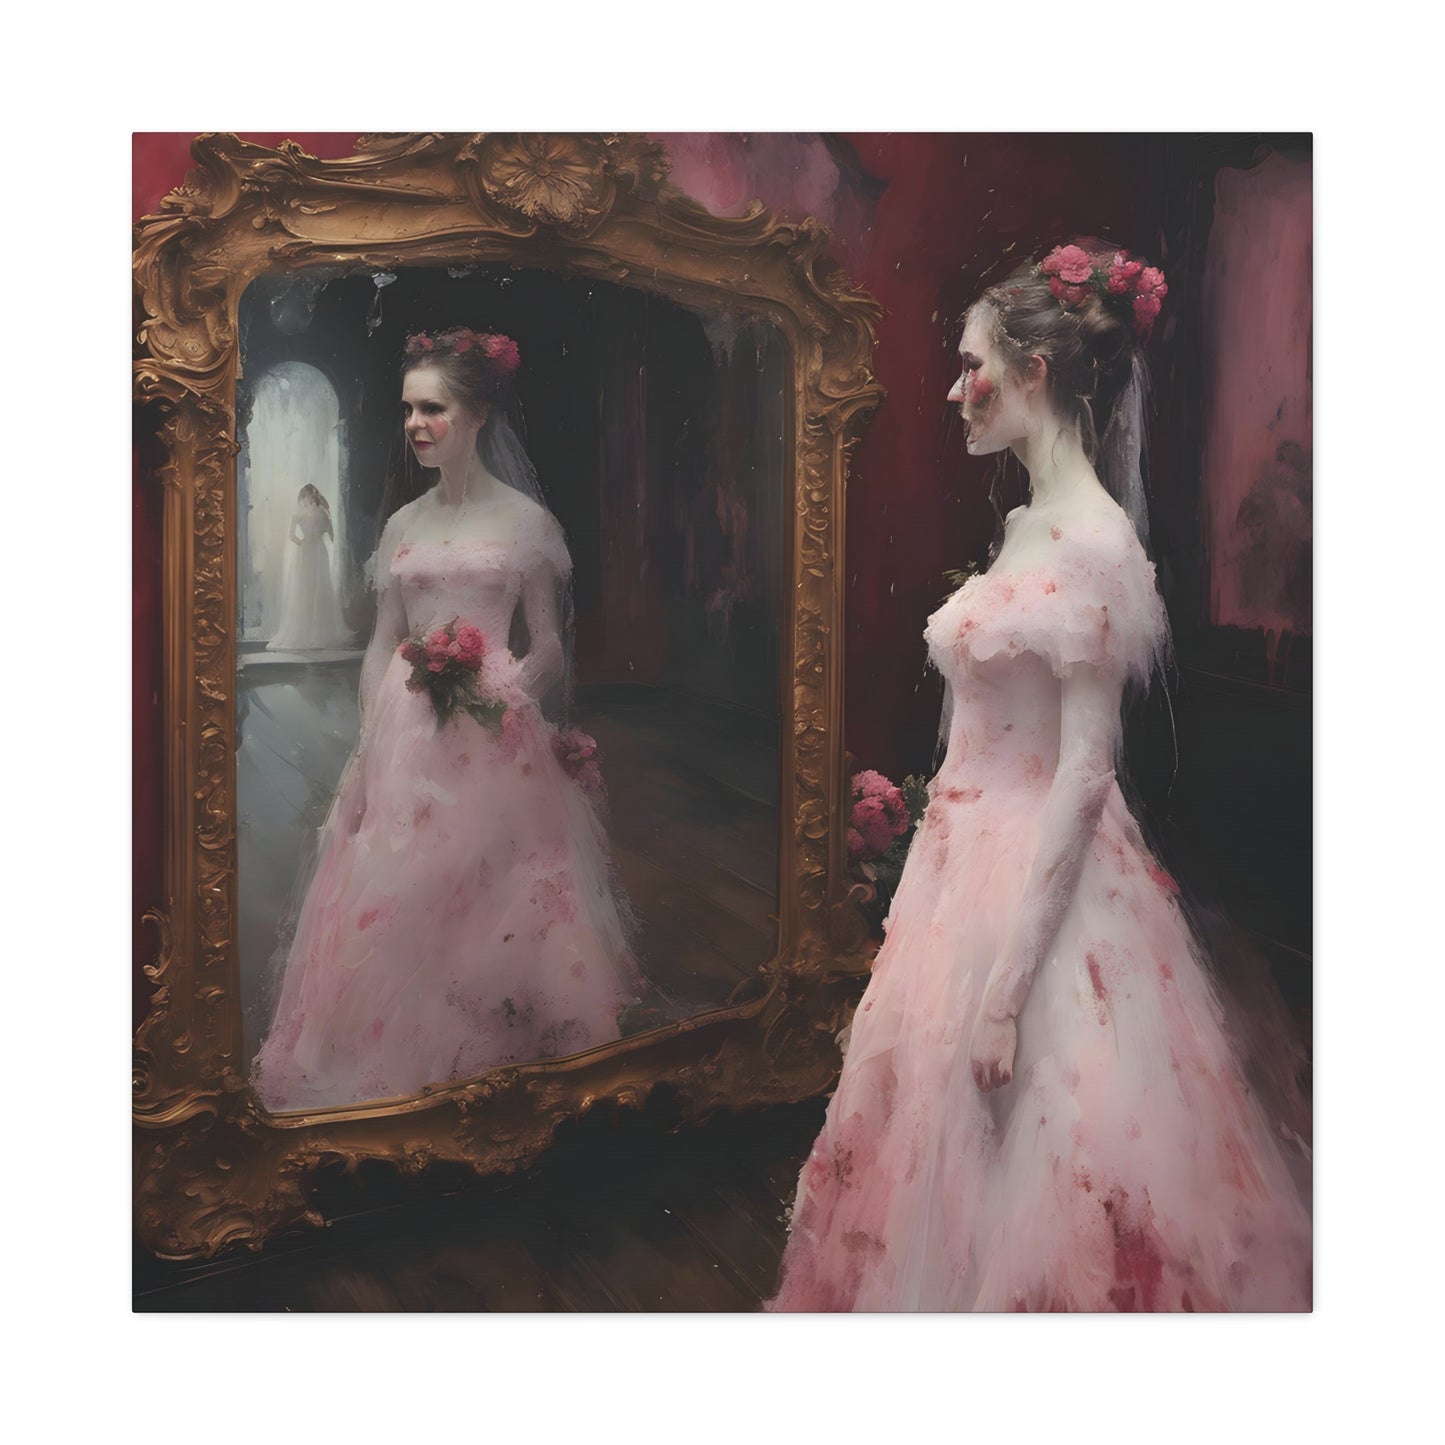 Reflections of a Timeless Moment' painting captures a bride in a vintage pink gown, reflecting in a grandiose mirror in a Victorian dressing room. The artwork contrasts the opulent gold frame with the room's dark tones, highlighting her delicate dress and tender expression, symbolizing personal reflection and quiet joy before a life-changing event